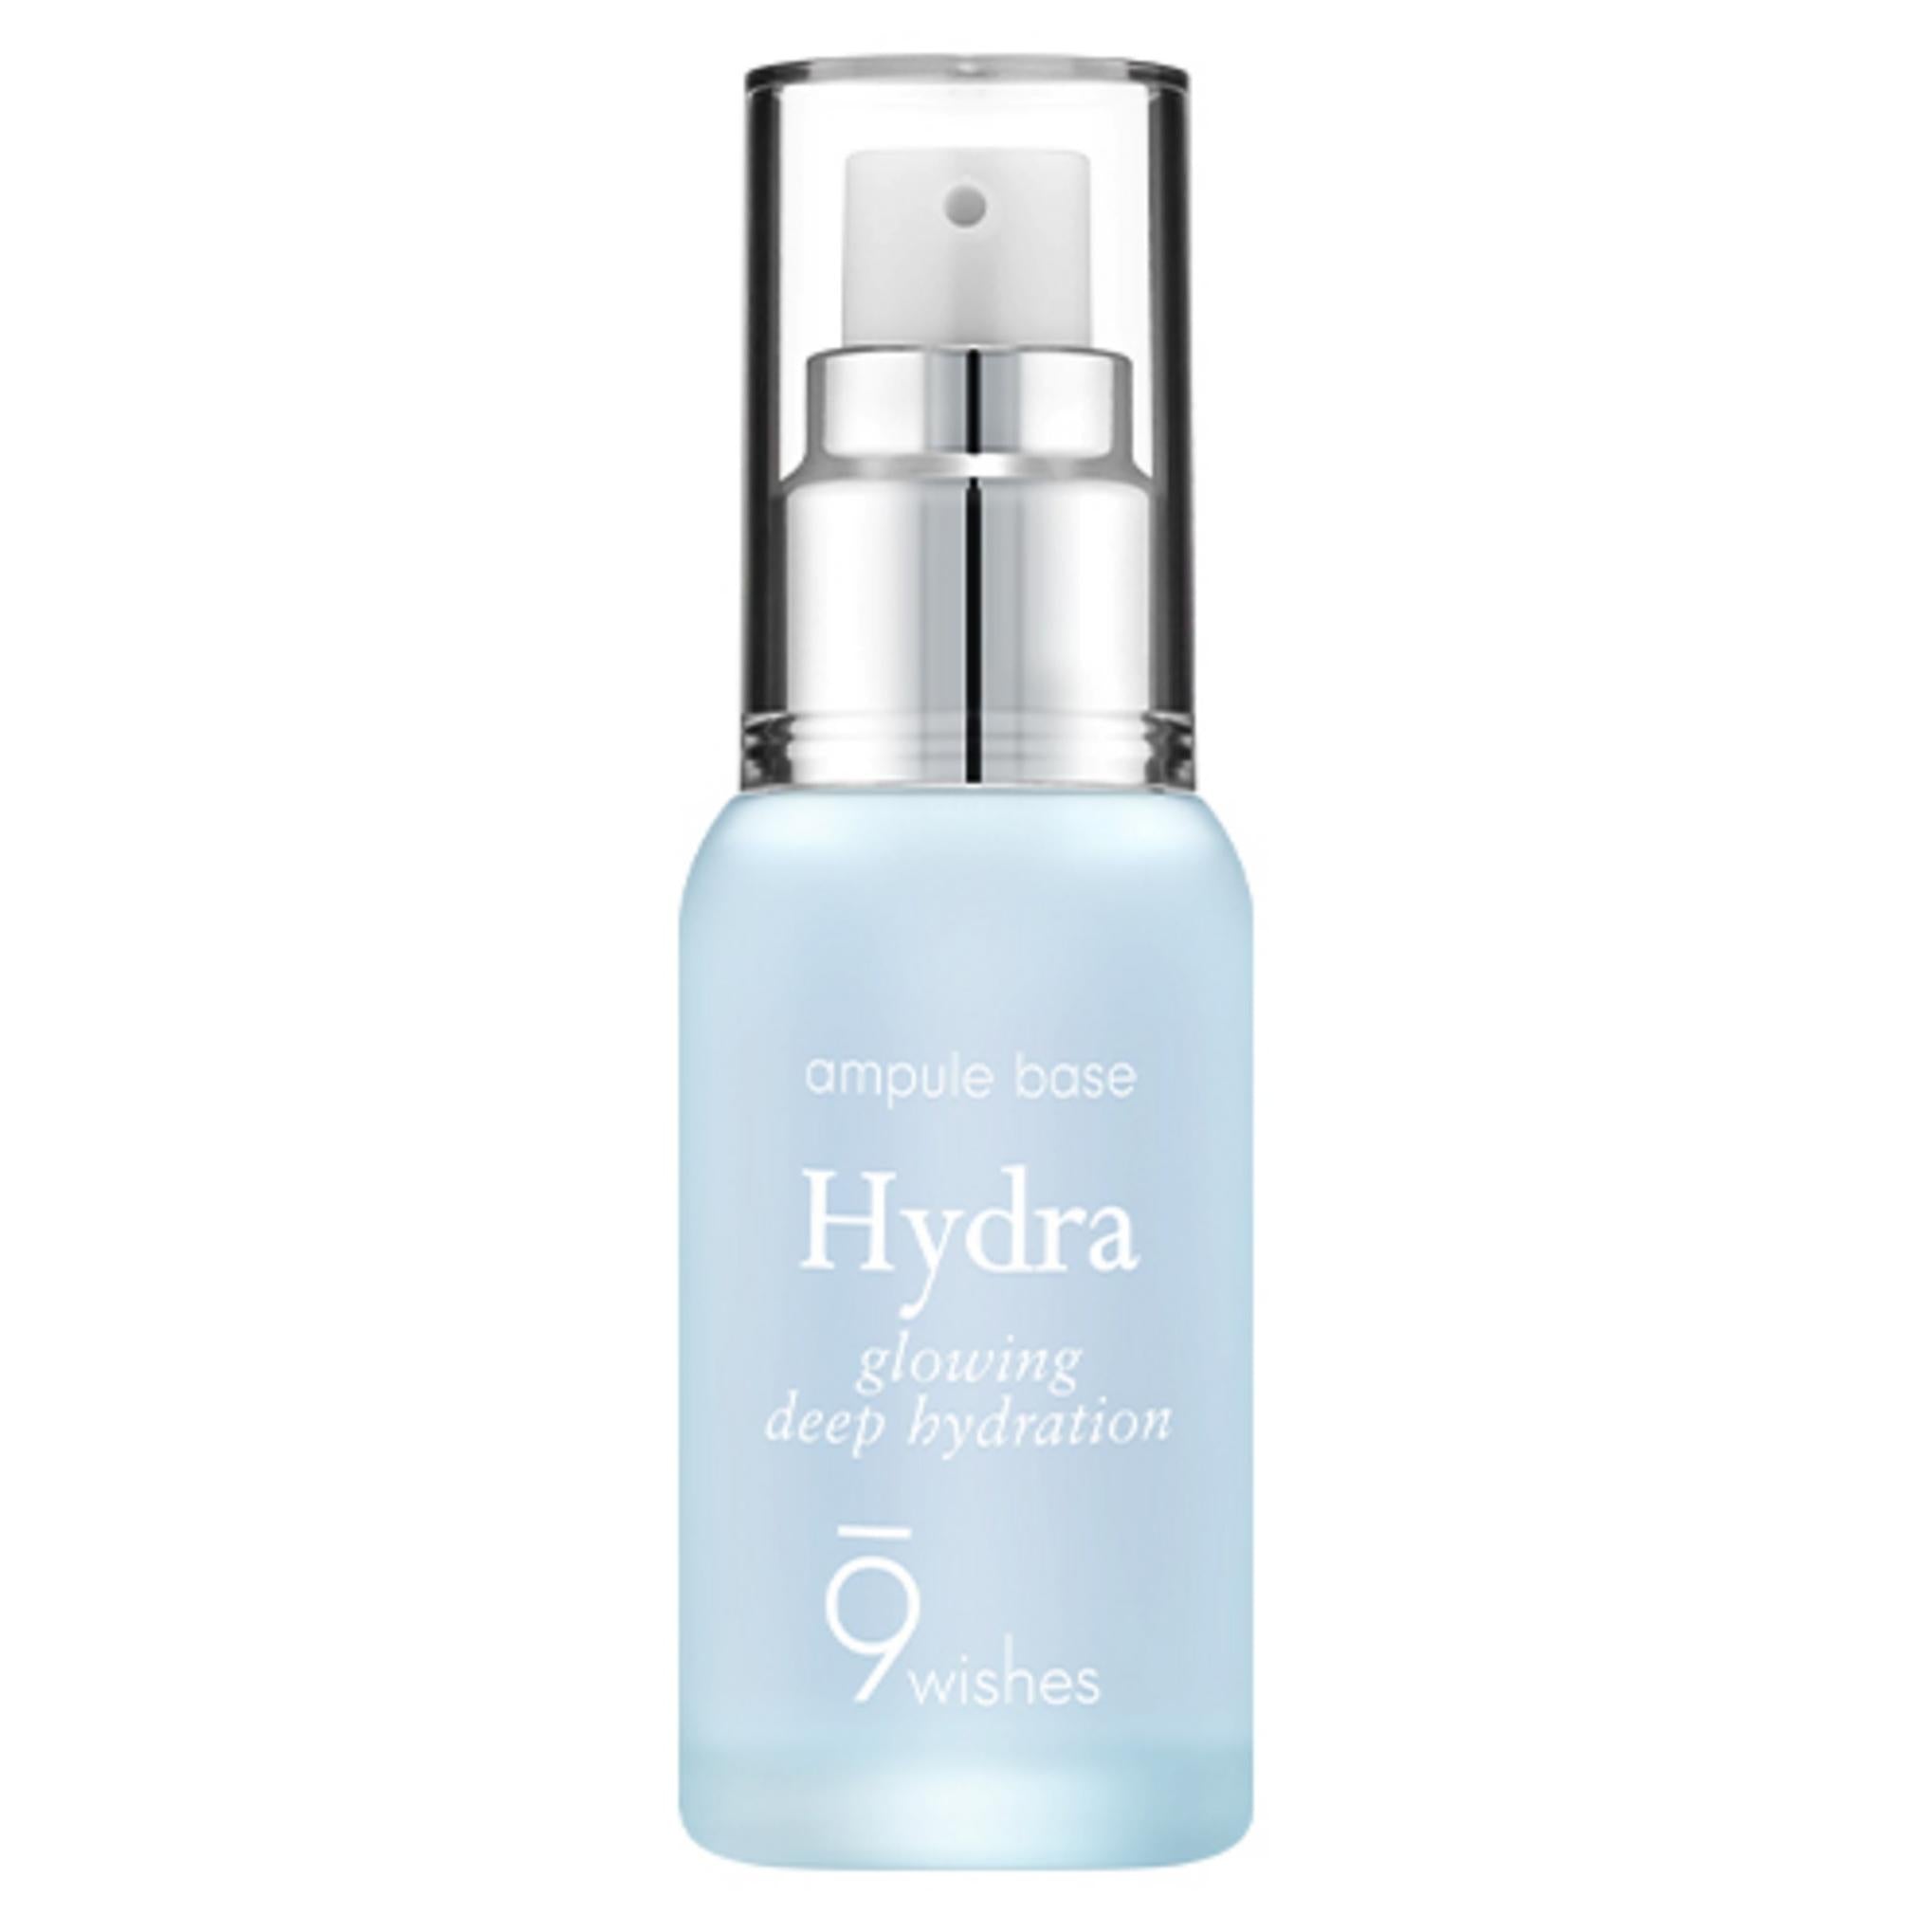 9 Wishes Hydra Moisture Ampoule Base